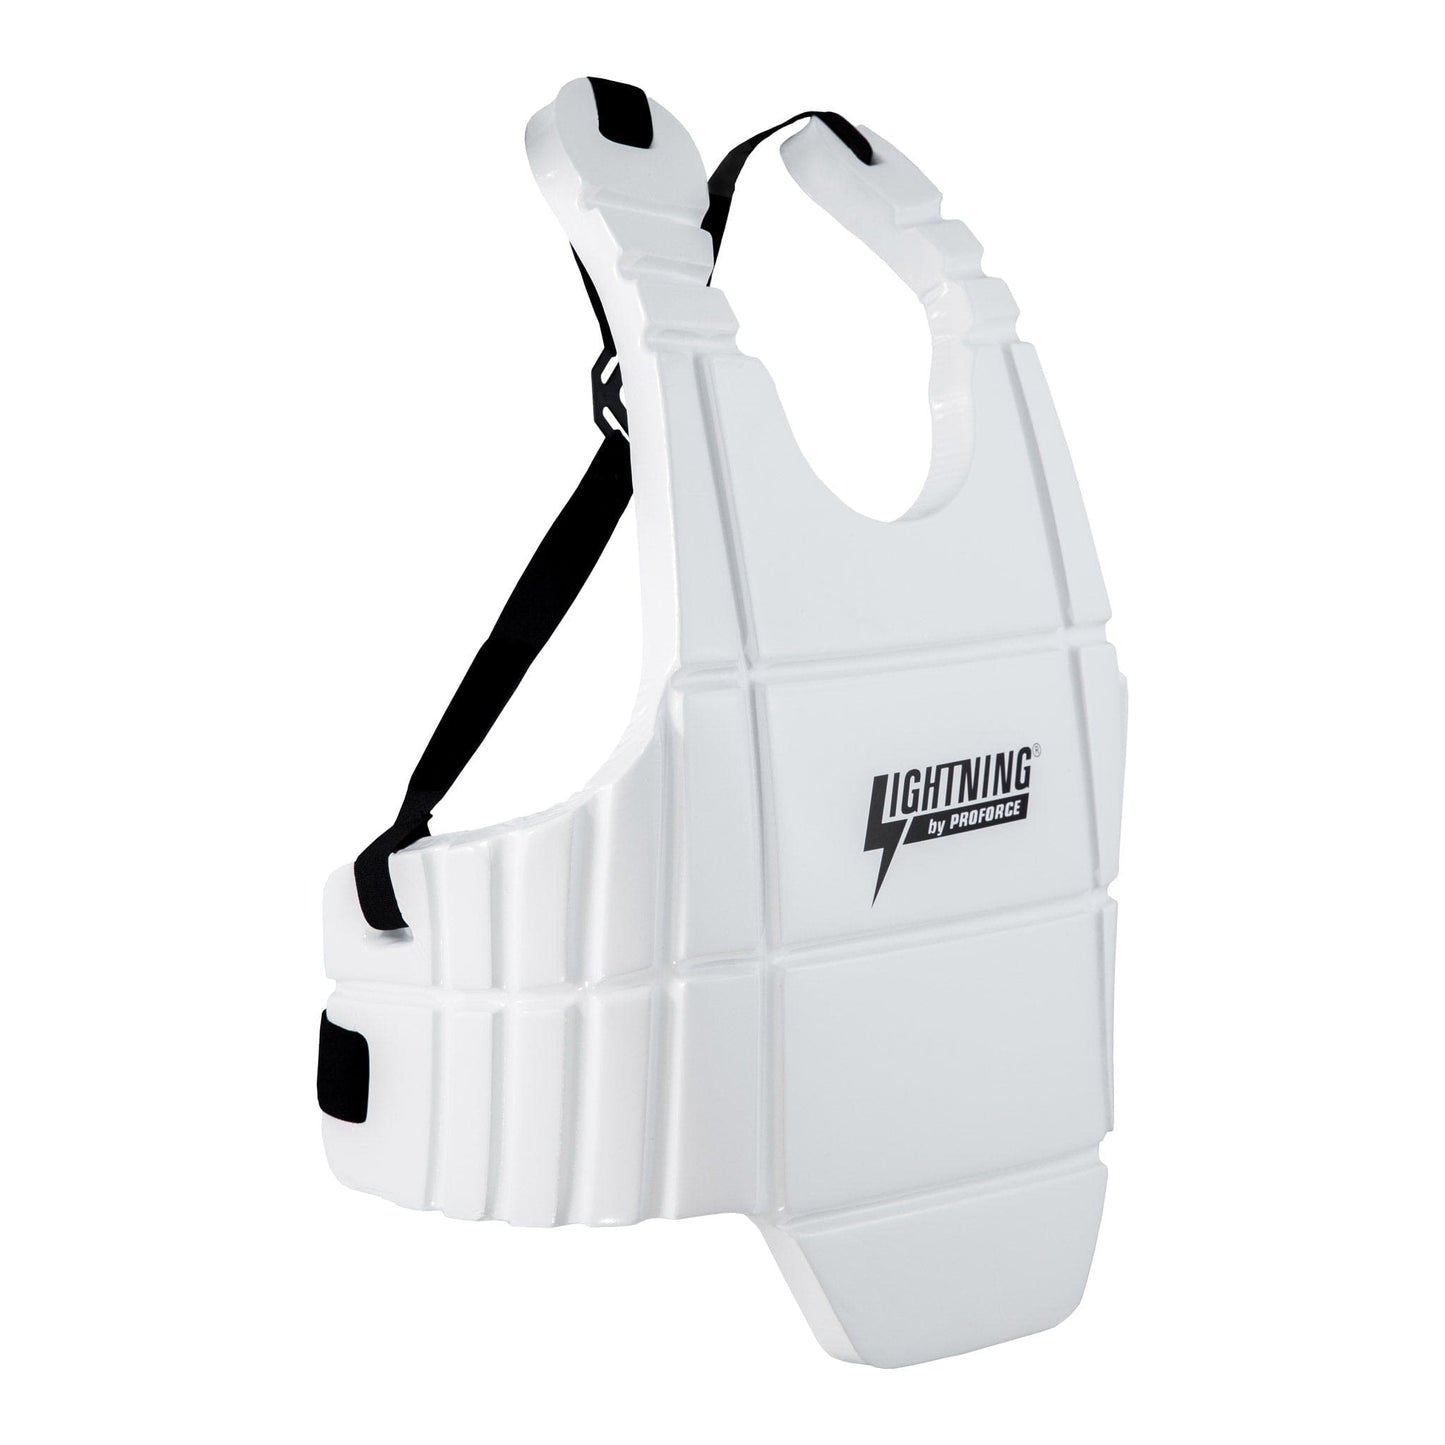 Proforce chest protector White / x-small (really small) ProForce Lightning Sports Body Guard